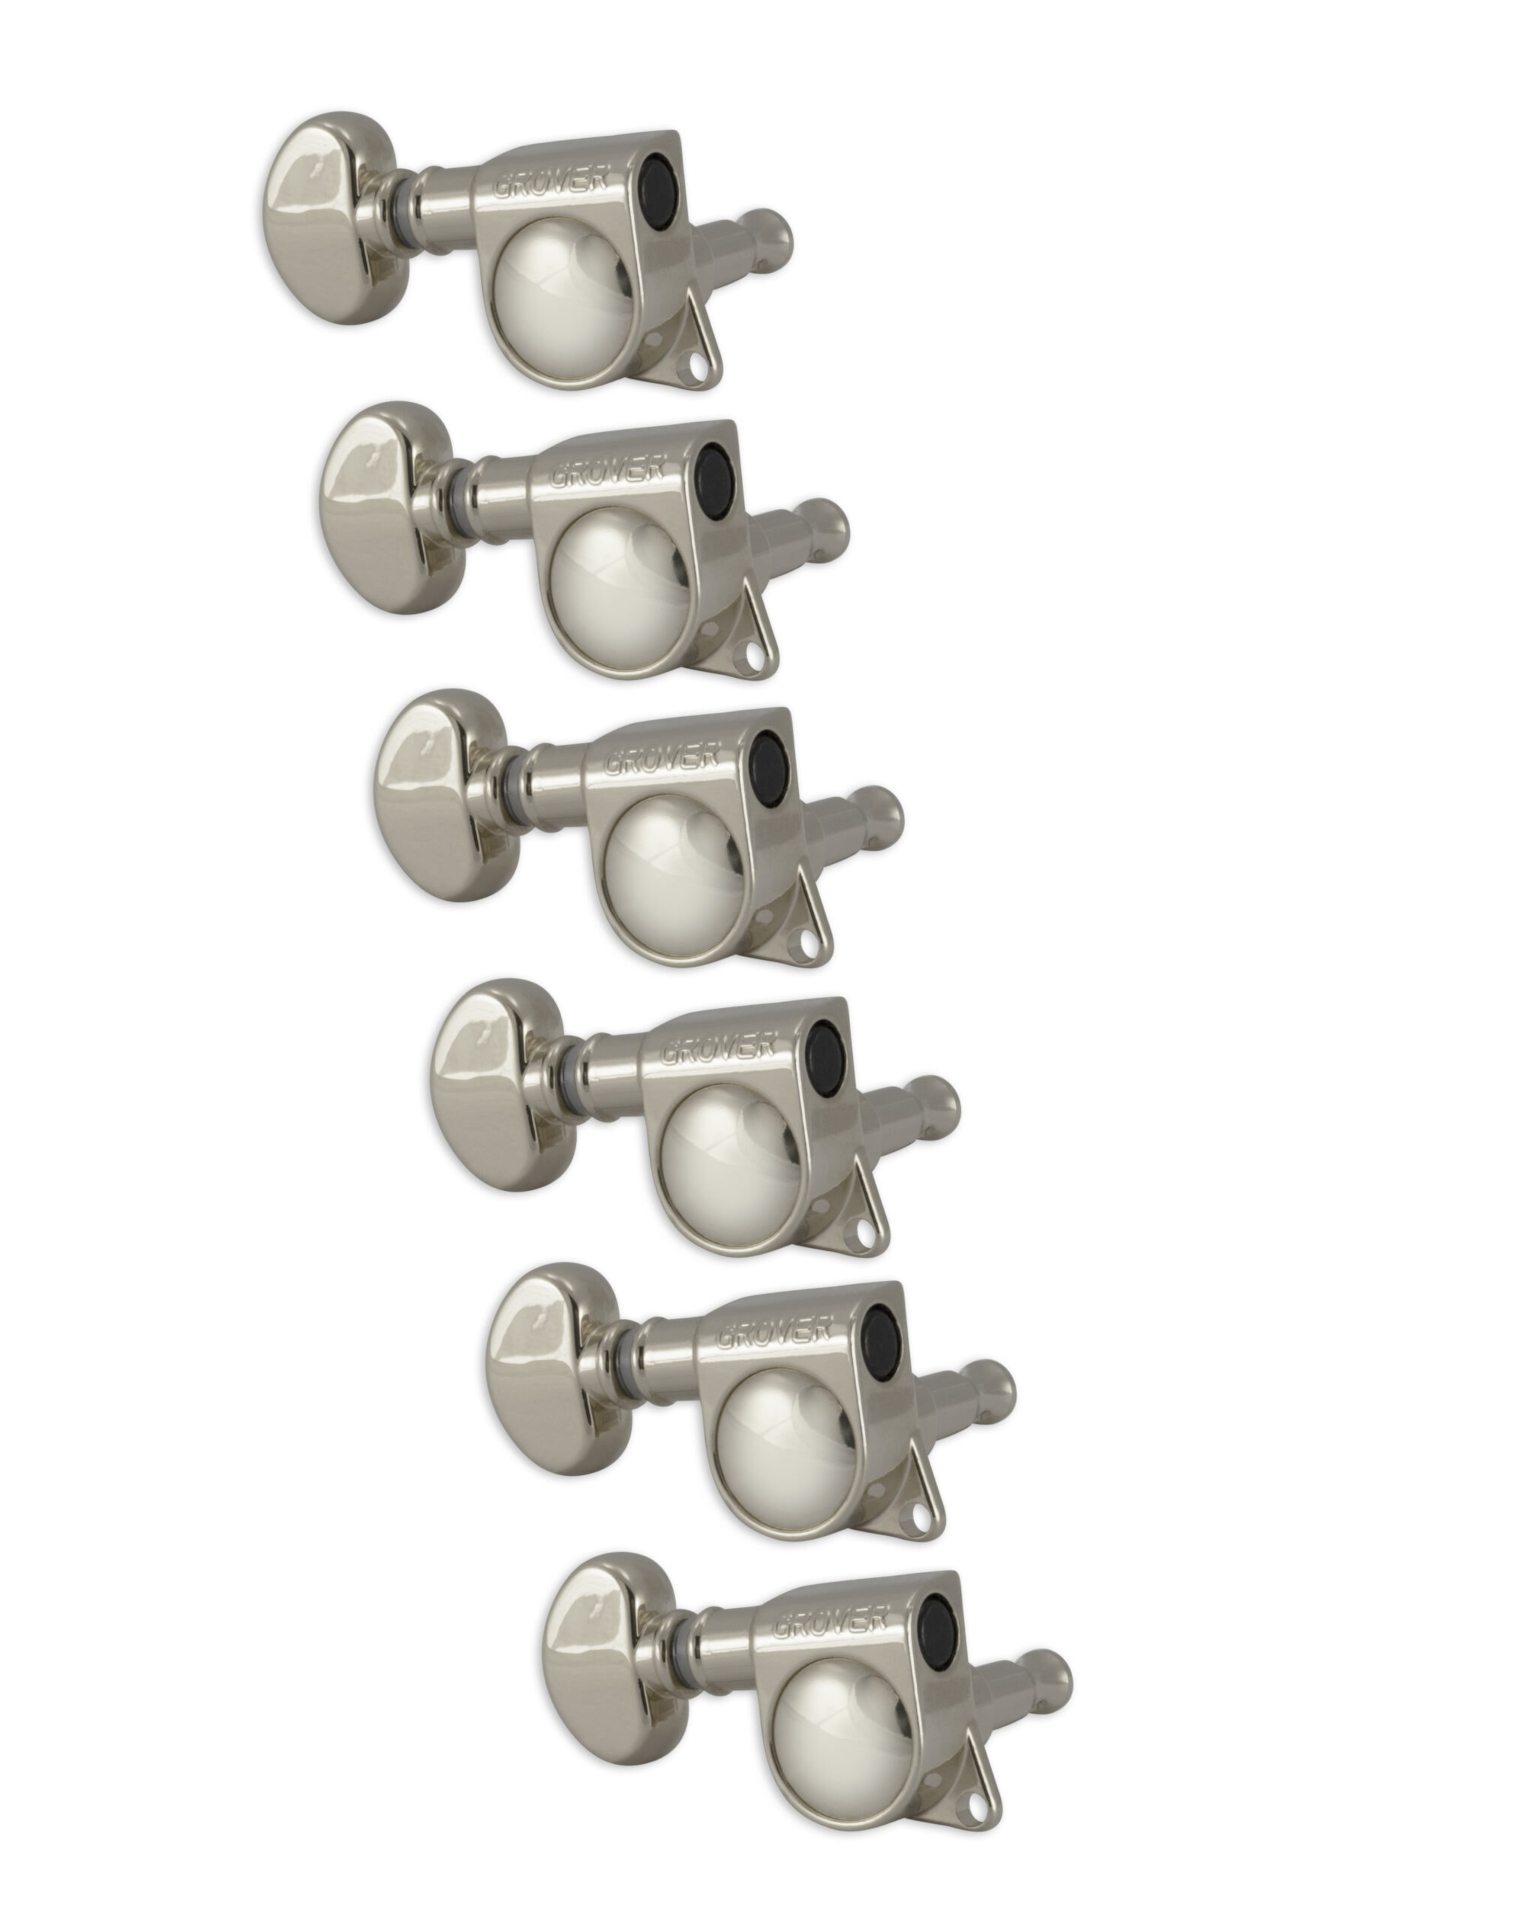 Grover 305NL6 Mid-Size Rotomatics with Round Button - Guitar Machine Heads, 6-in-Line, Lefthand, Treble Side (Right) - Nickel